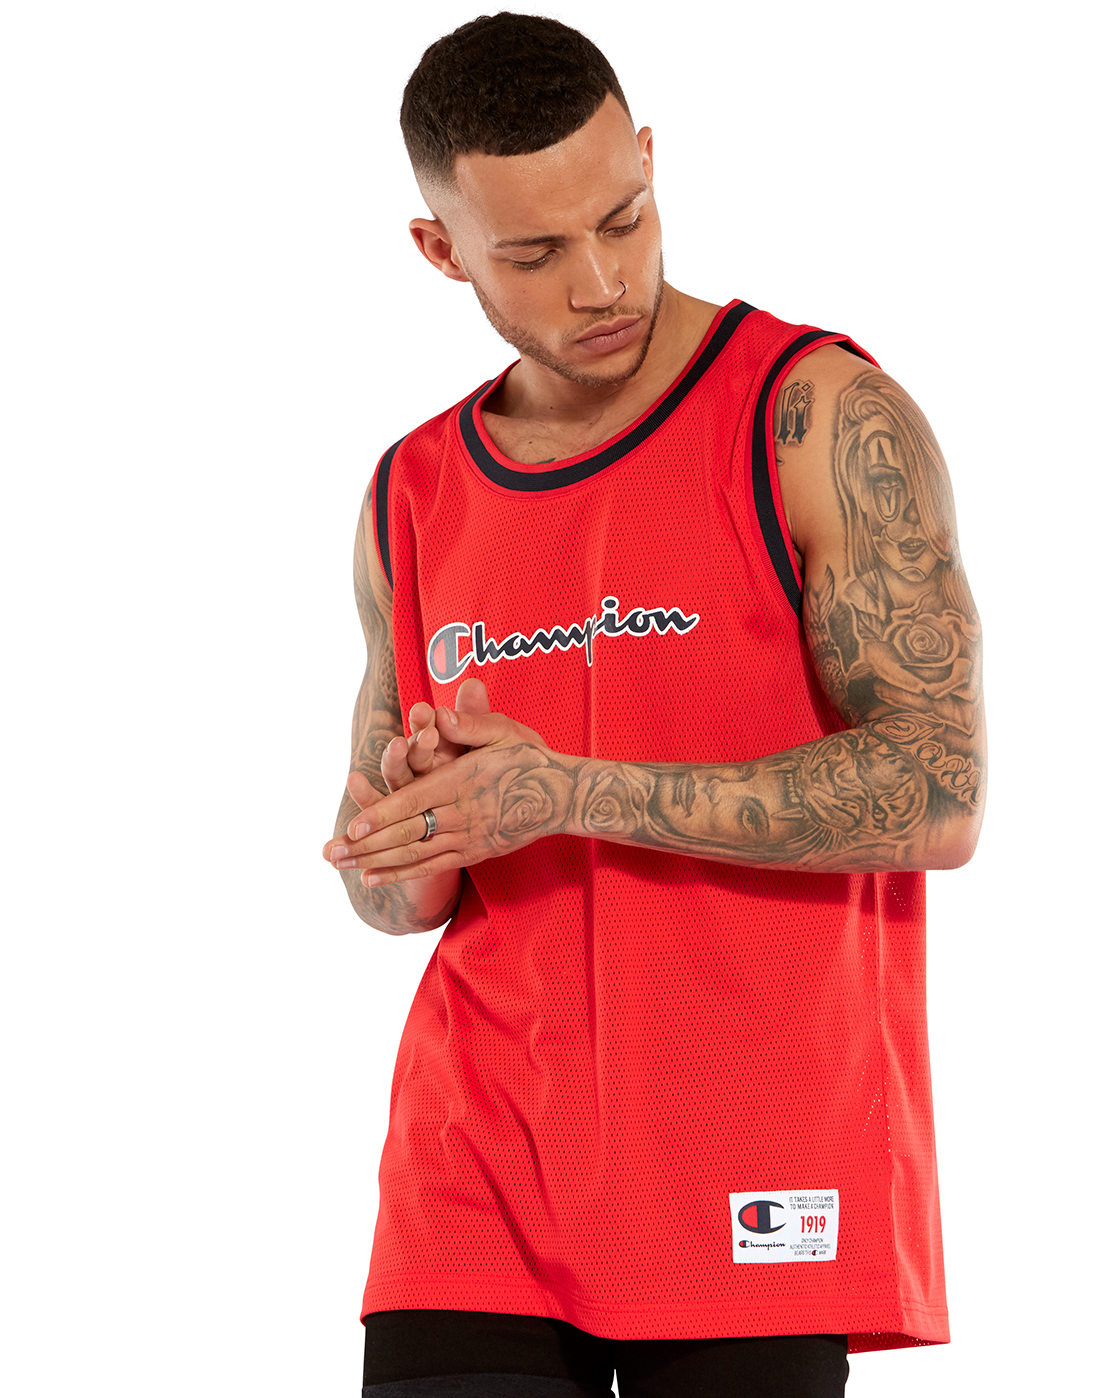 Red Champion Tank Top | Life Style Sports